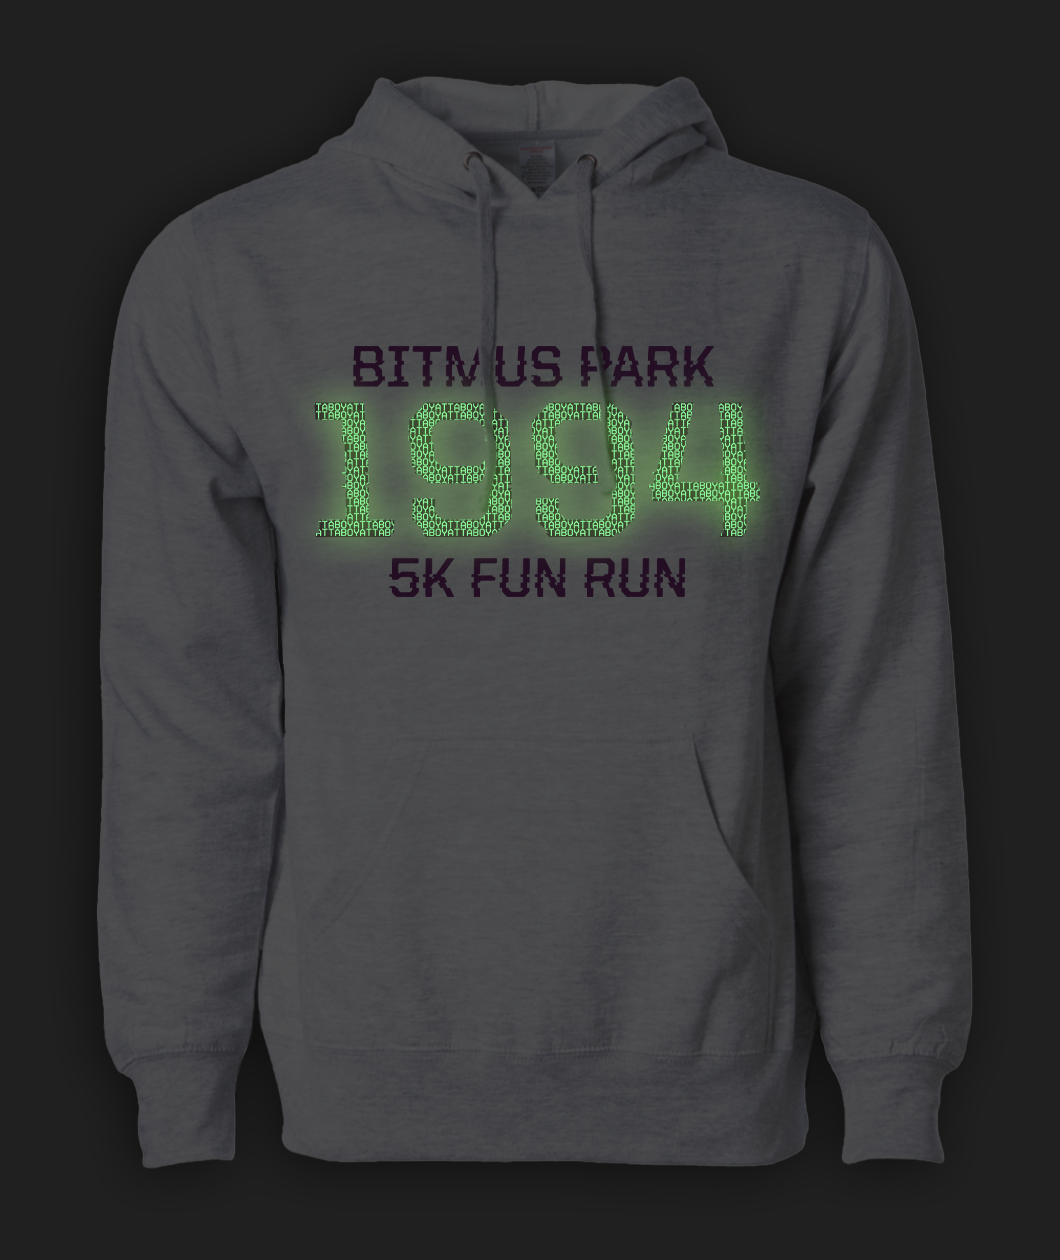 Heather white hoodie with large glowing 1994 in the front center and "Bitmus Park 5K Fun Run" sandwiched around it in smaller font. by Brian David Gilbert